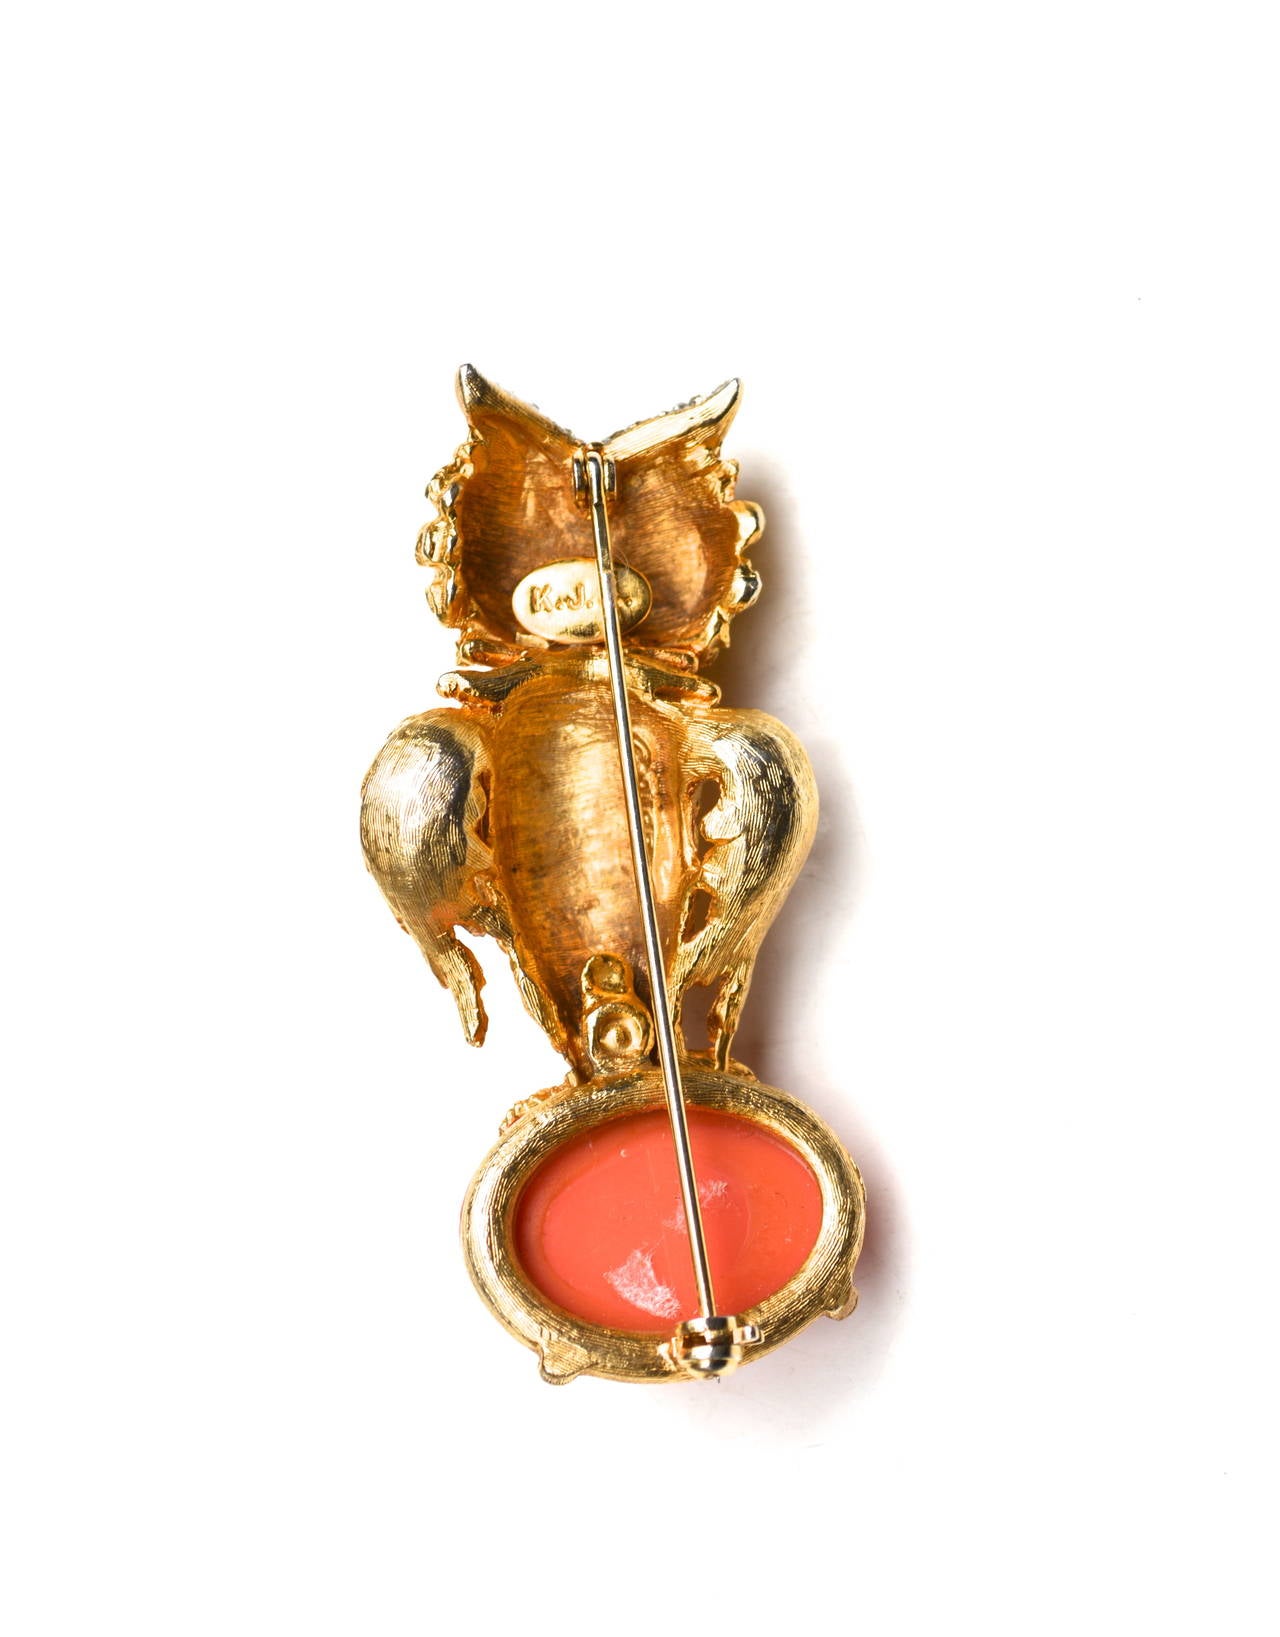 Produced in the 1960s, it is signed K.J.L and this early golden owl has glass and lucite details. The whimsical fellow features fun colors and has a great scale at 2.5